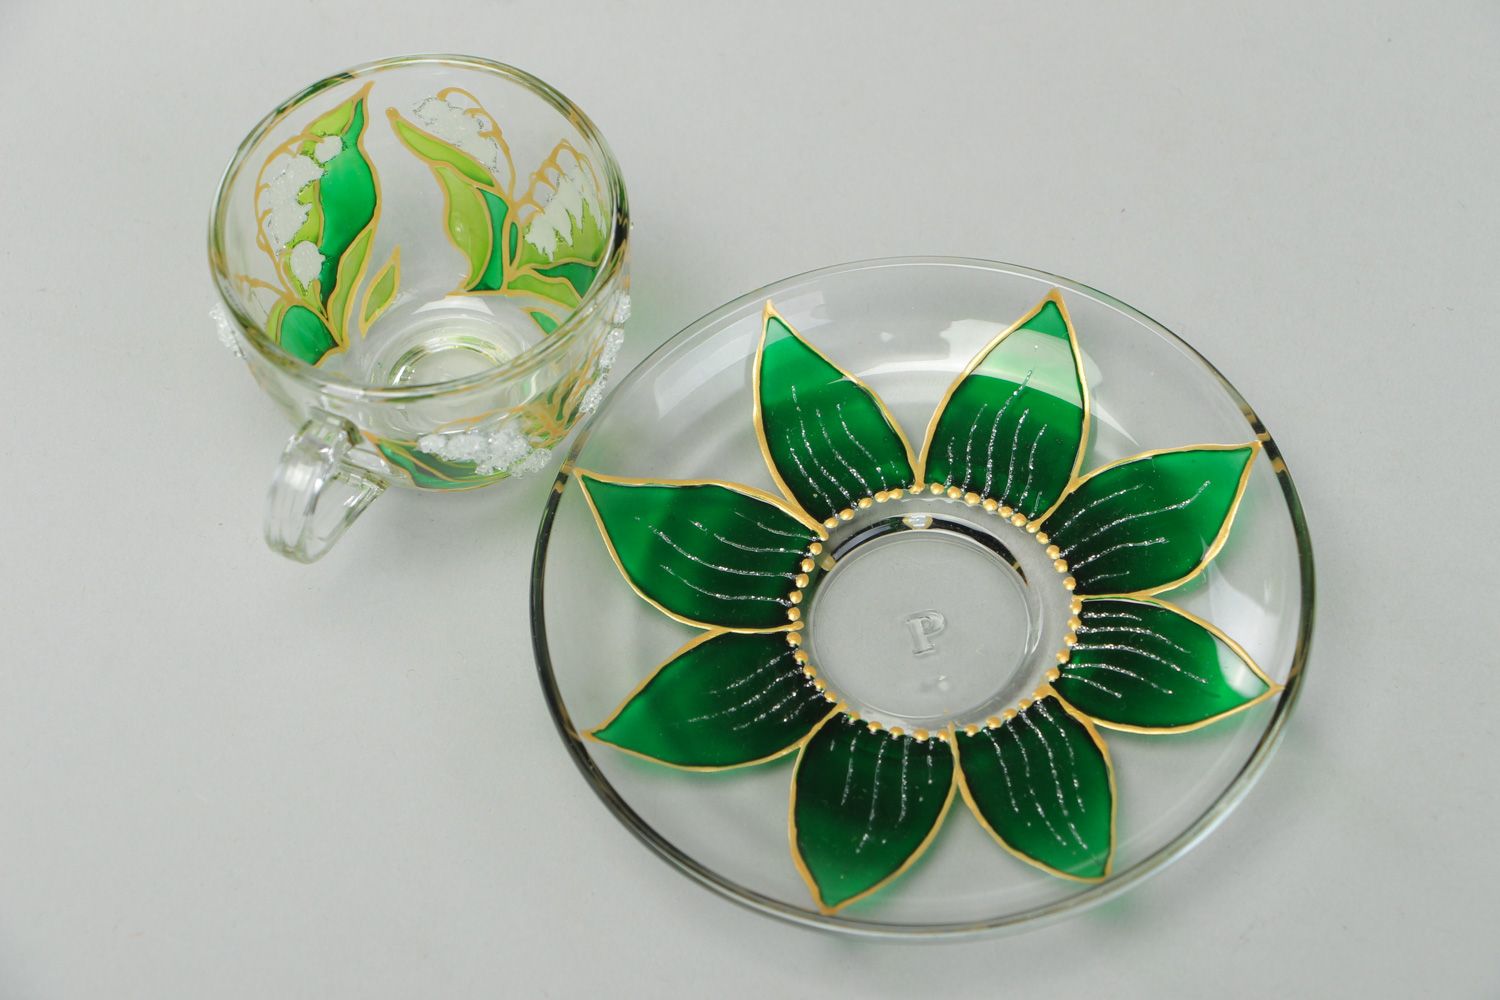 Unique clear glass teacup with hand-painted gold and green floral pattern photo 2